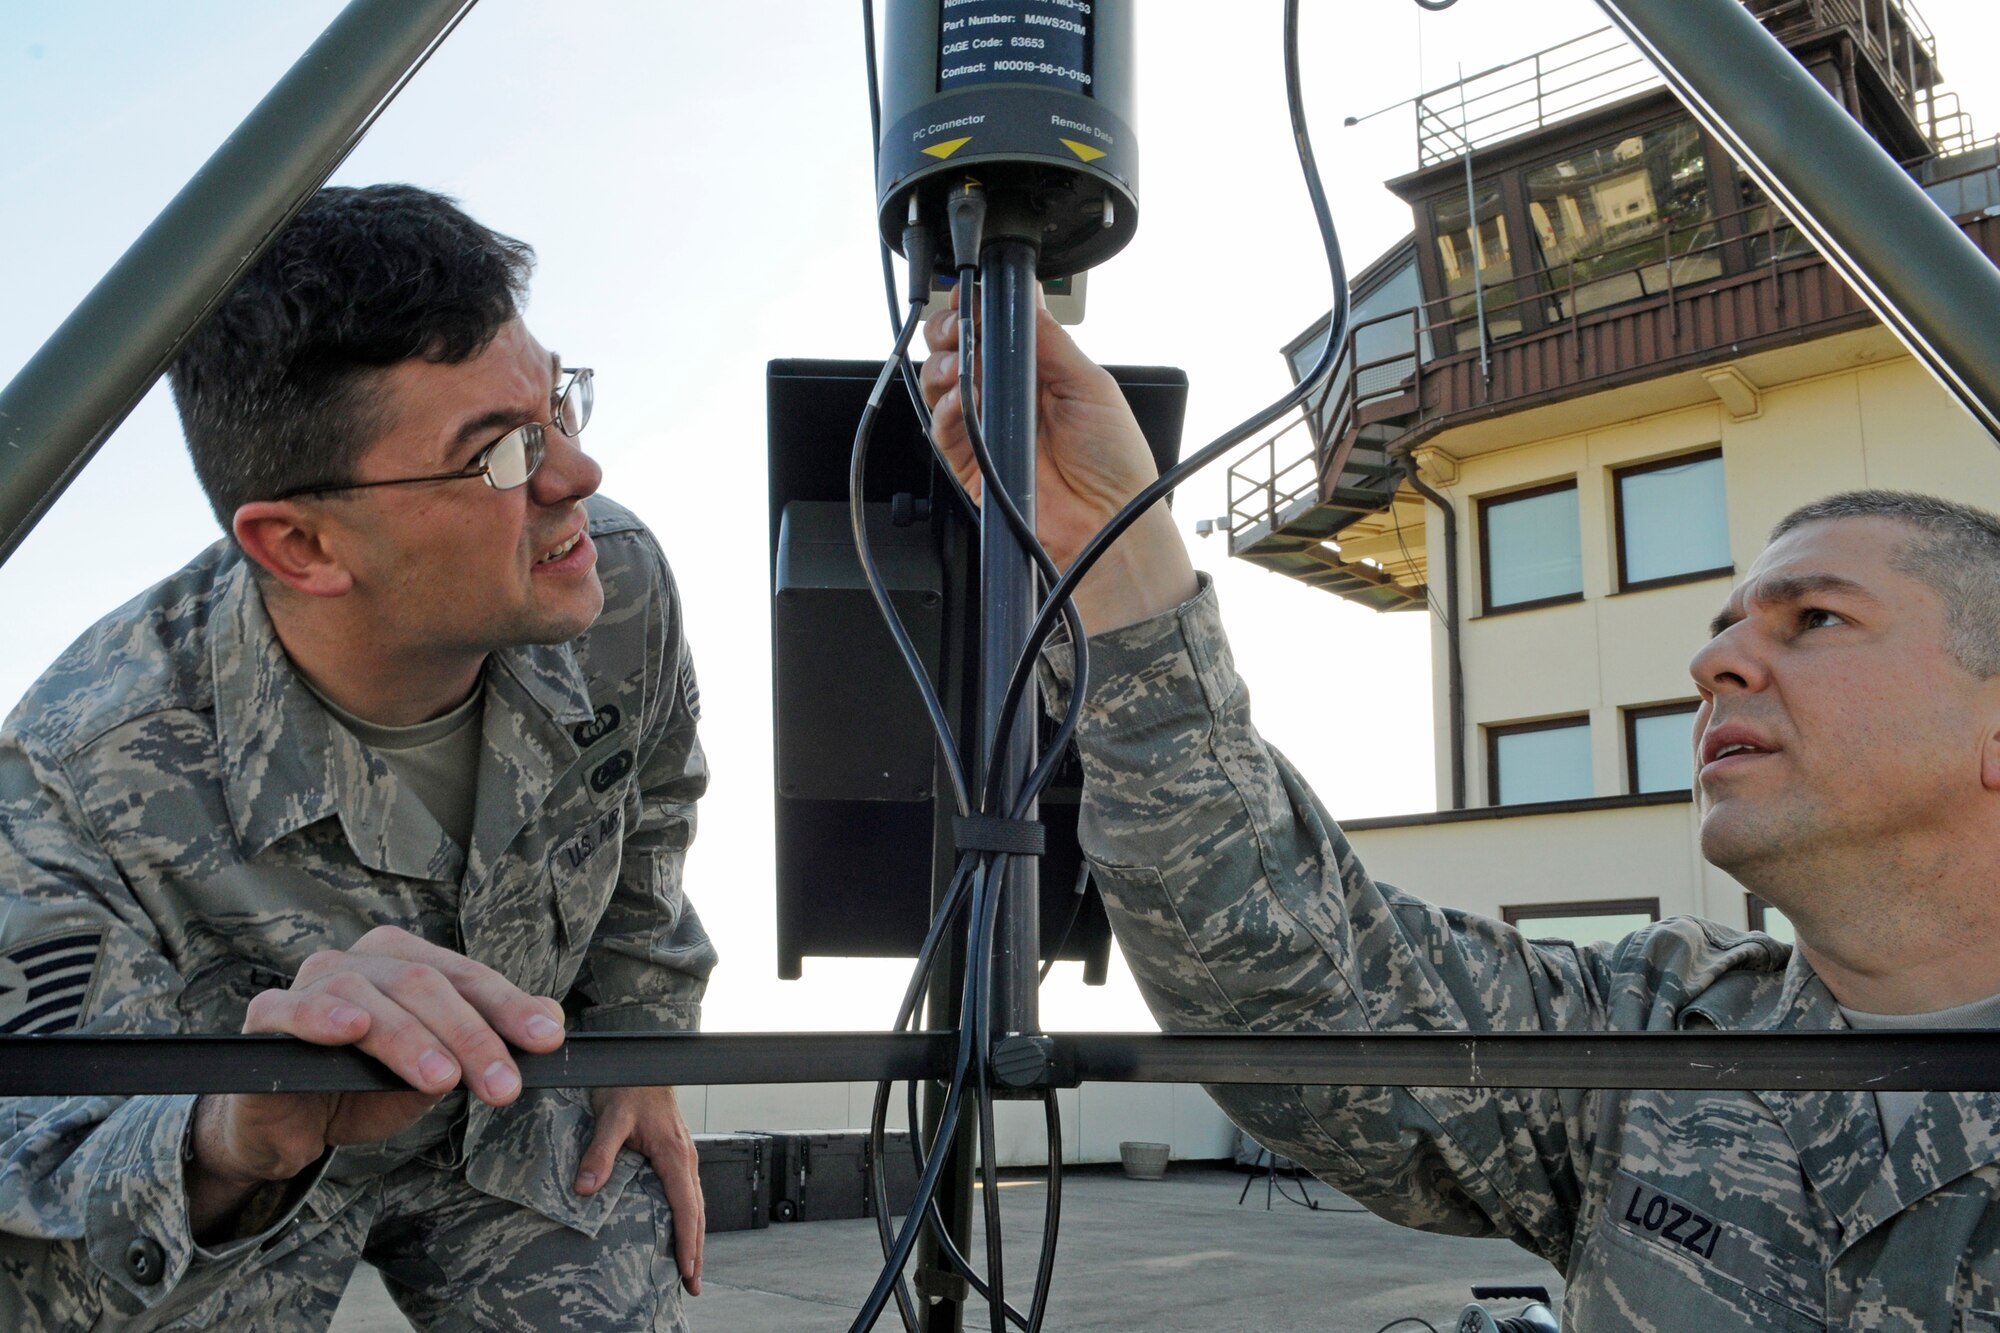 SPANGDAHLEM AIR BASE, Germany – Tech. Sgts. Warren Labare and Christopher Lozzi, 52nd Operations Support Squadron mission weather forecasters, set up and test a deployable, automated weather-observing system to ensure it meets standards and technical-order guidelines during a Standards Evaluation Program for Weather Operations and Air Traffic System Evaluation Program inspection conducted by U.S. Air Forces in Europe inspectors Oct. 20. “The 52nd OSS and the (52nd Fighter Wing) came together and demonstrated to the inspectors of the air traffic system and weather operations our ability to provide safe and efficient air traffic service to the 52nd FW and Air Mobility Command assets, alike,” said Capt. Ryan Guess, 52nd OSS airfield operations flight commander. “Spangdahlem Air Base garnered an ‘Excellent’ rating – determined after evaluating more than 700 checklist items. This inspection looked at specific functional areas of the 52nd OSS, 52nd Communications Squadron, 52nd Civil Engineer Squadron and wing safety. I would like to thank each of them for the dedication to excellence, which ensured our evaluation’s success. Finally, to all of the airfield drivers who operated safely not only during the inspection, but also for previous months and years, thank you for helping us show inspectors our commitment to safe airfield driving habits.” (U.S. Air Force photo/Senior Airman Benjamin Wilson)